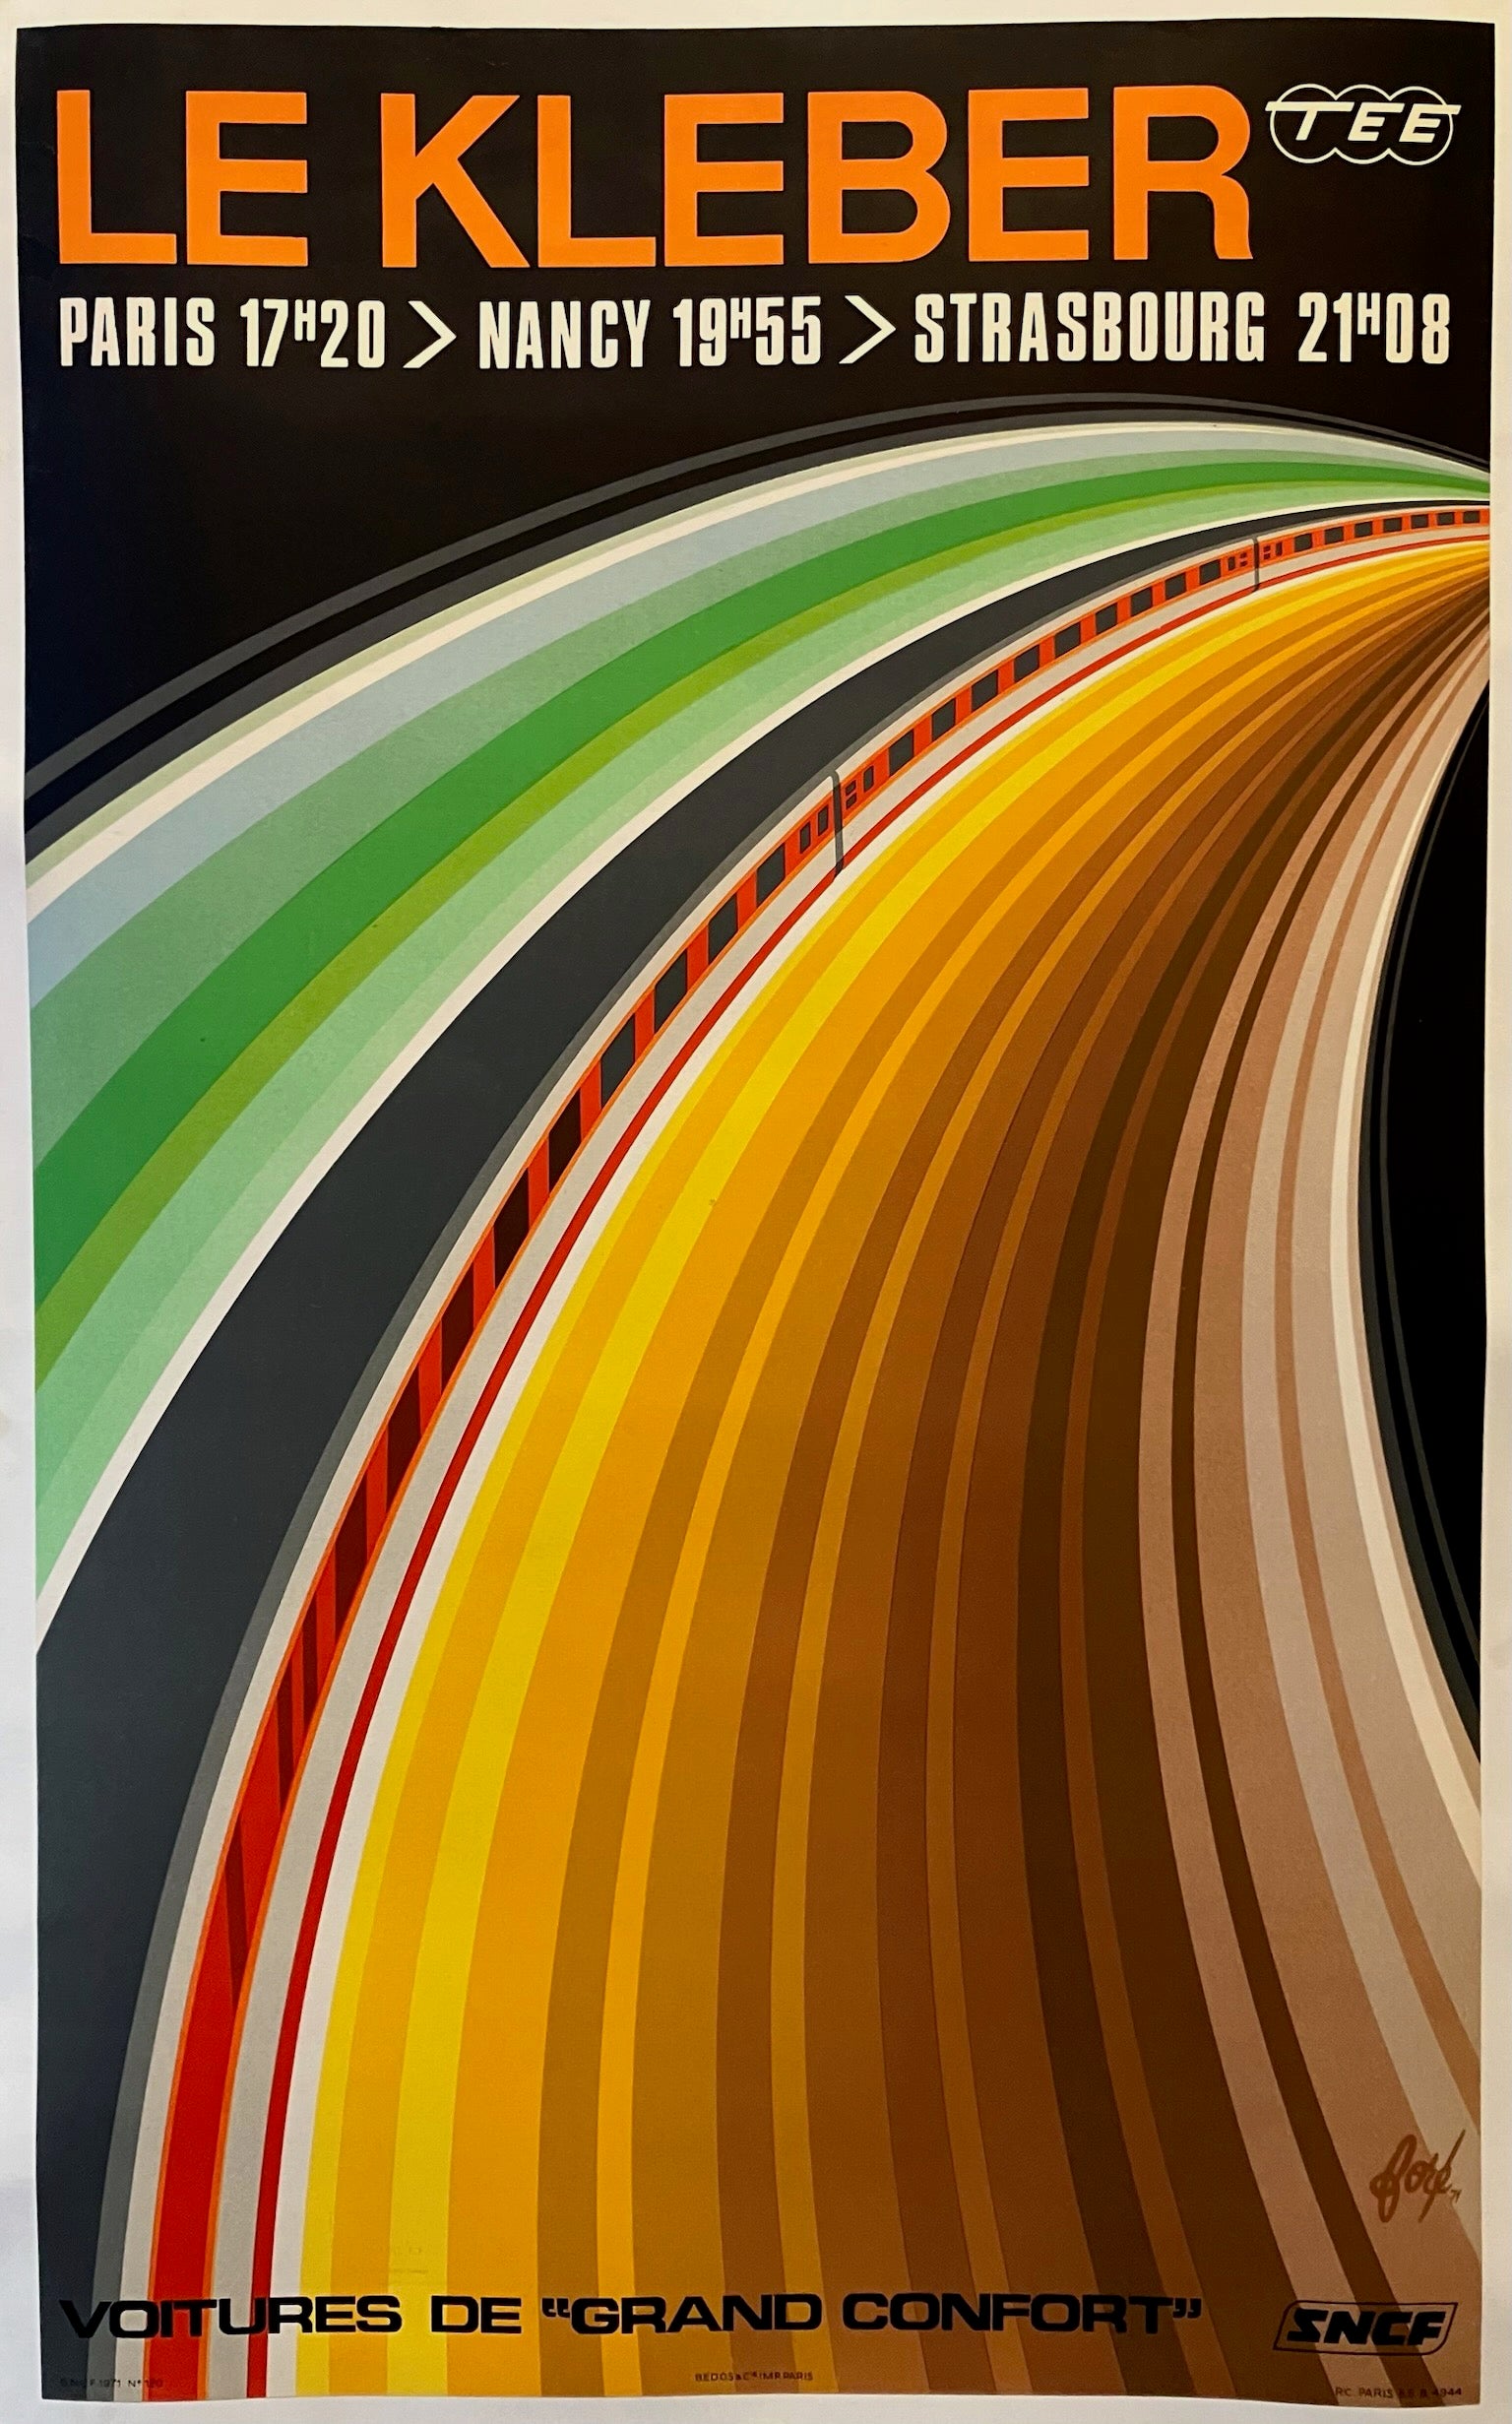 24.5x39 poster for the German railway system featuring a green, orange, yellow, and brown rainbow of colors representing the motion of the train